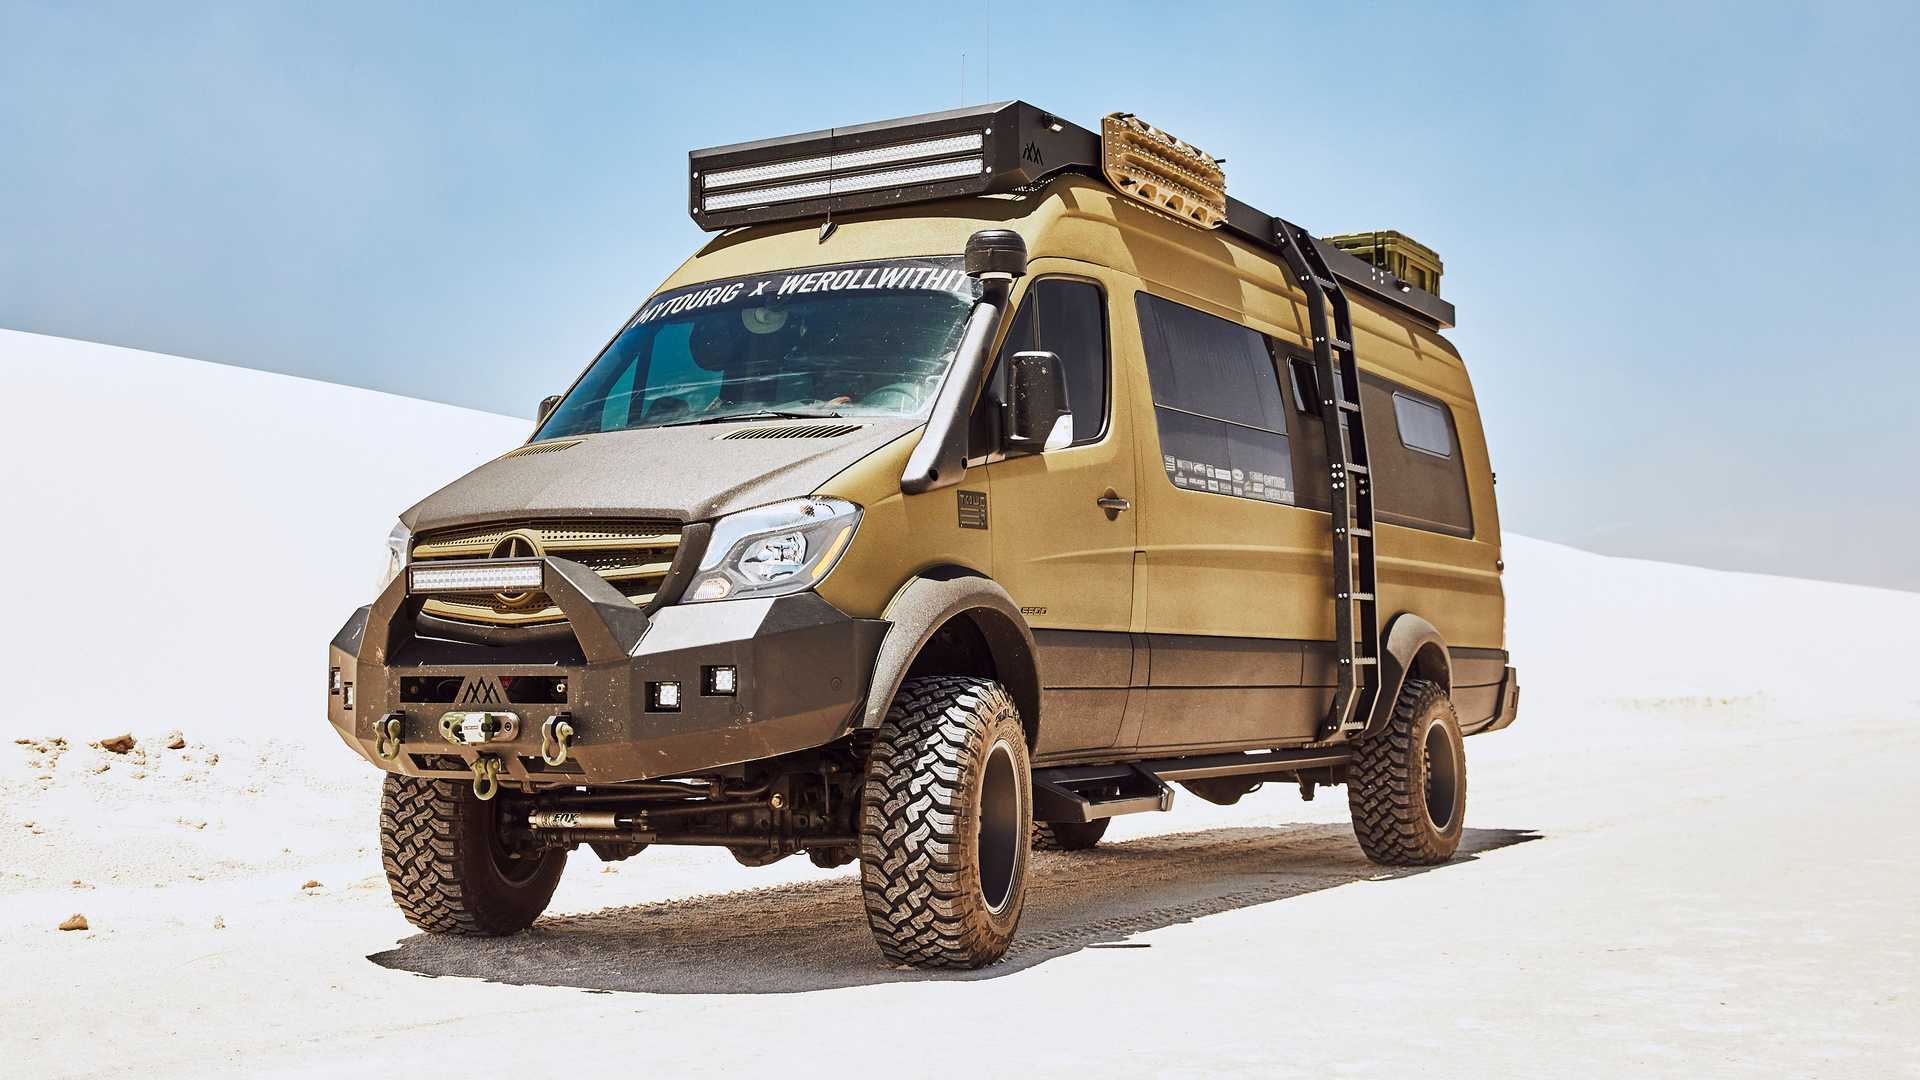 This Sprinter Expedition Camper Van Is Hulked Out For Off-Roading